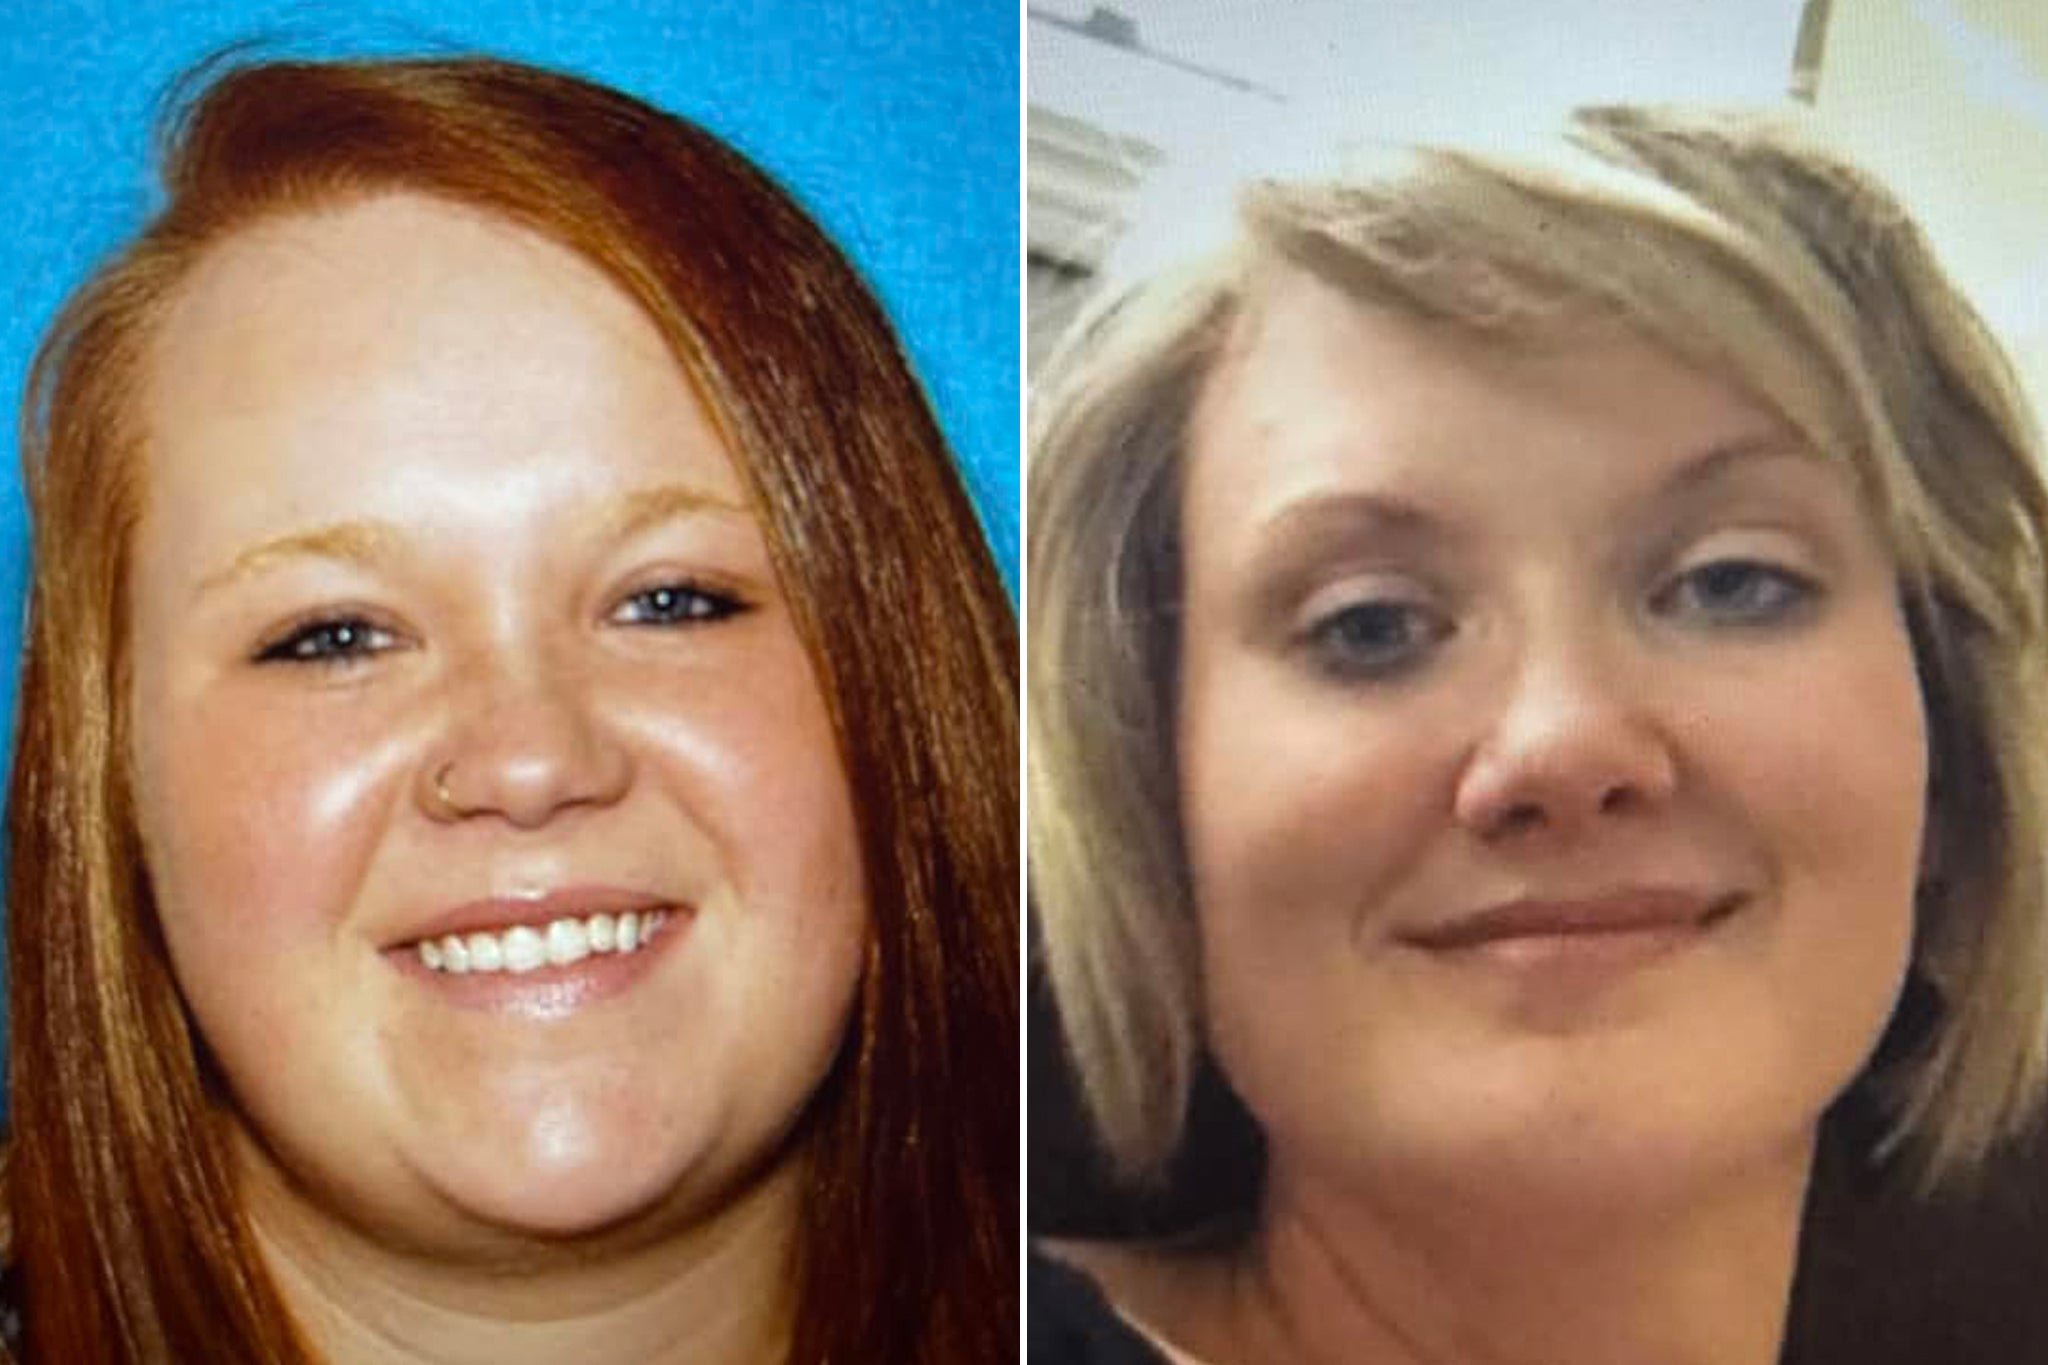 Veronica Butler, 27, and Jilian Kelley, 39 have vanished while driving together